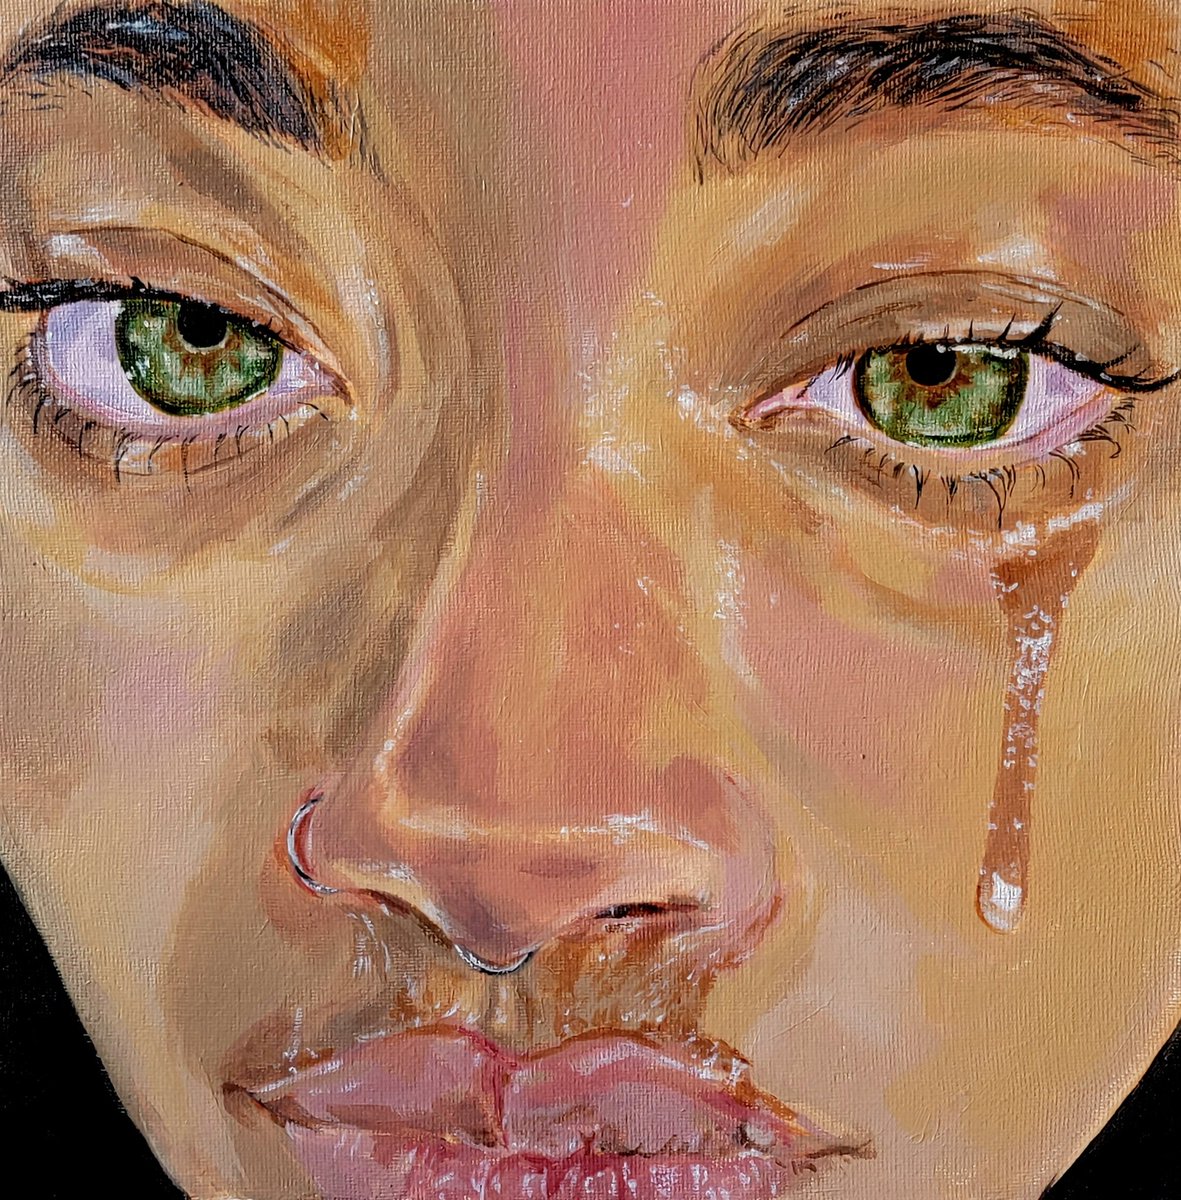 RT @juliemaexartt: Willow Smith shares new photo crying 

Acrylic on canvas https://t.co/sh6v8zKlDm